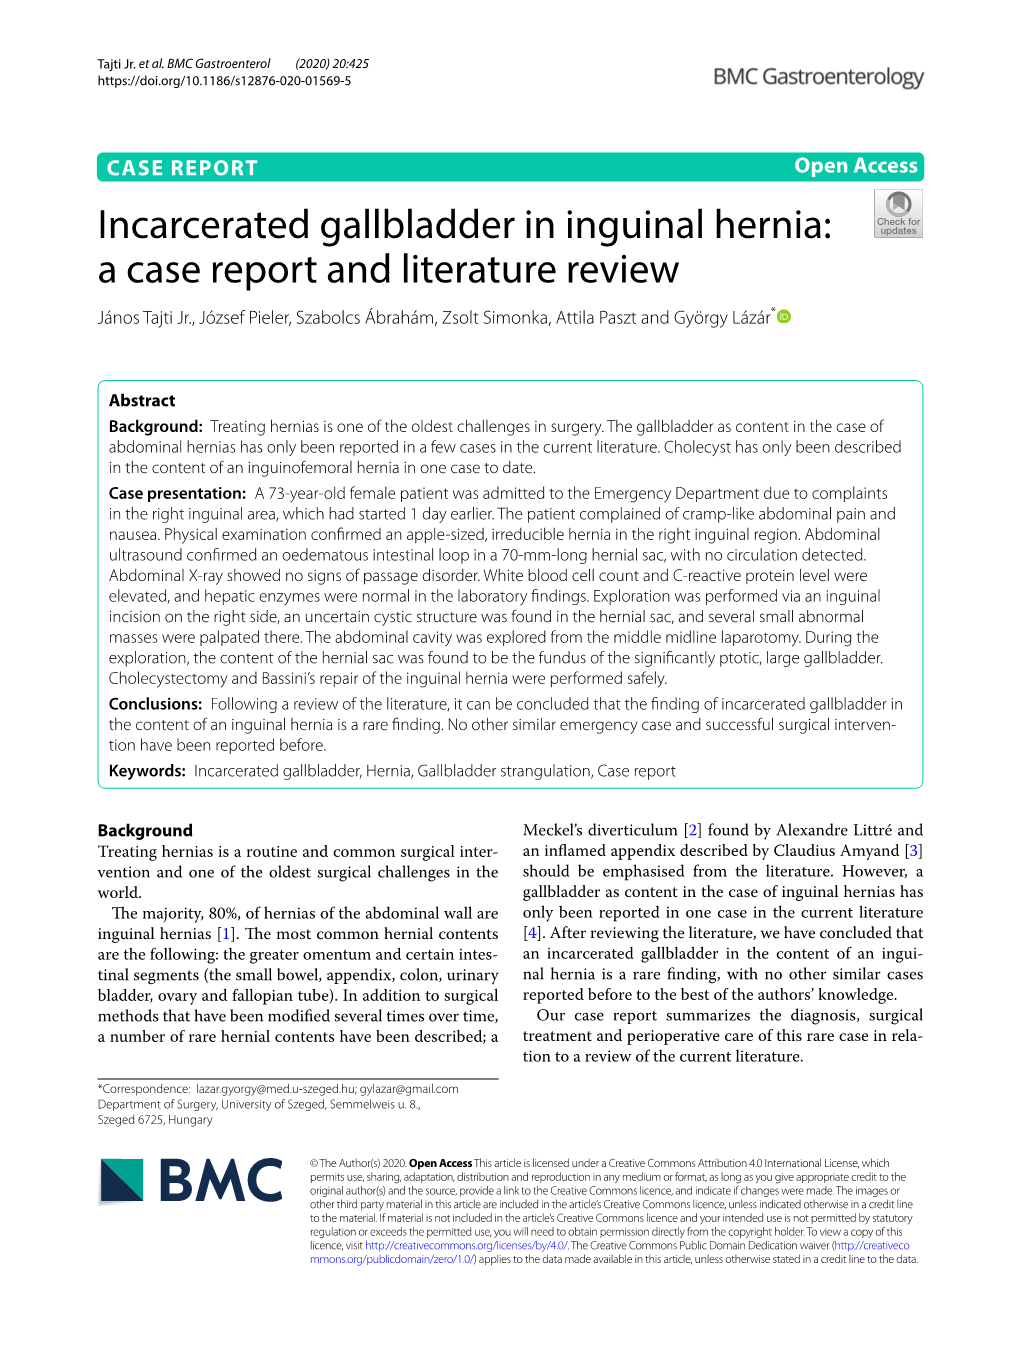 Incarcerated Gallbladder in Inguinal Hernia: a Case Report and Literature